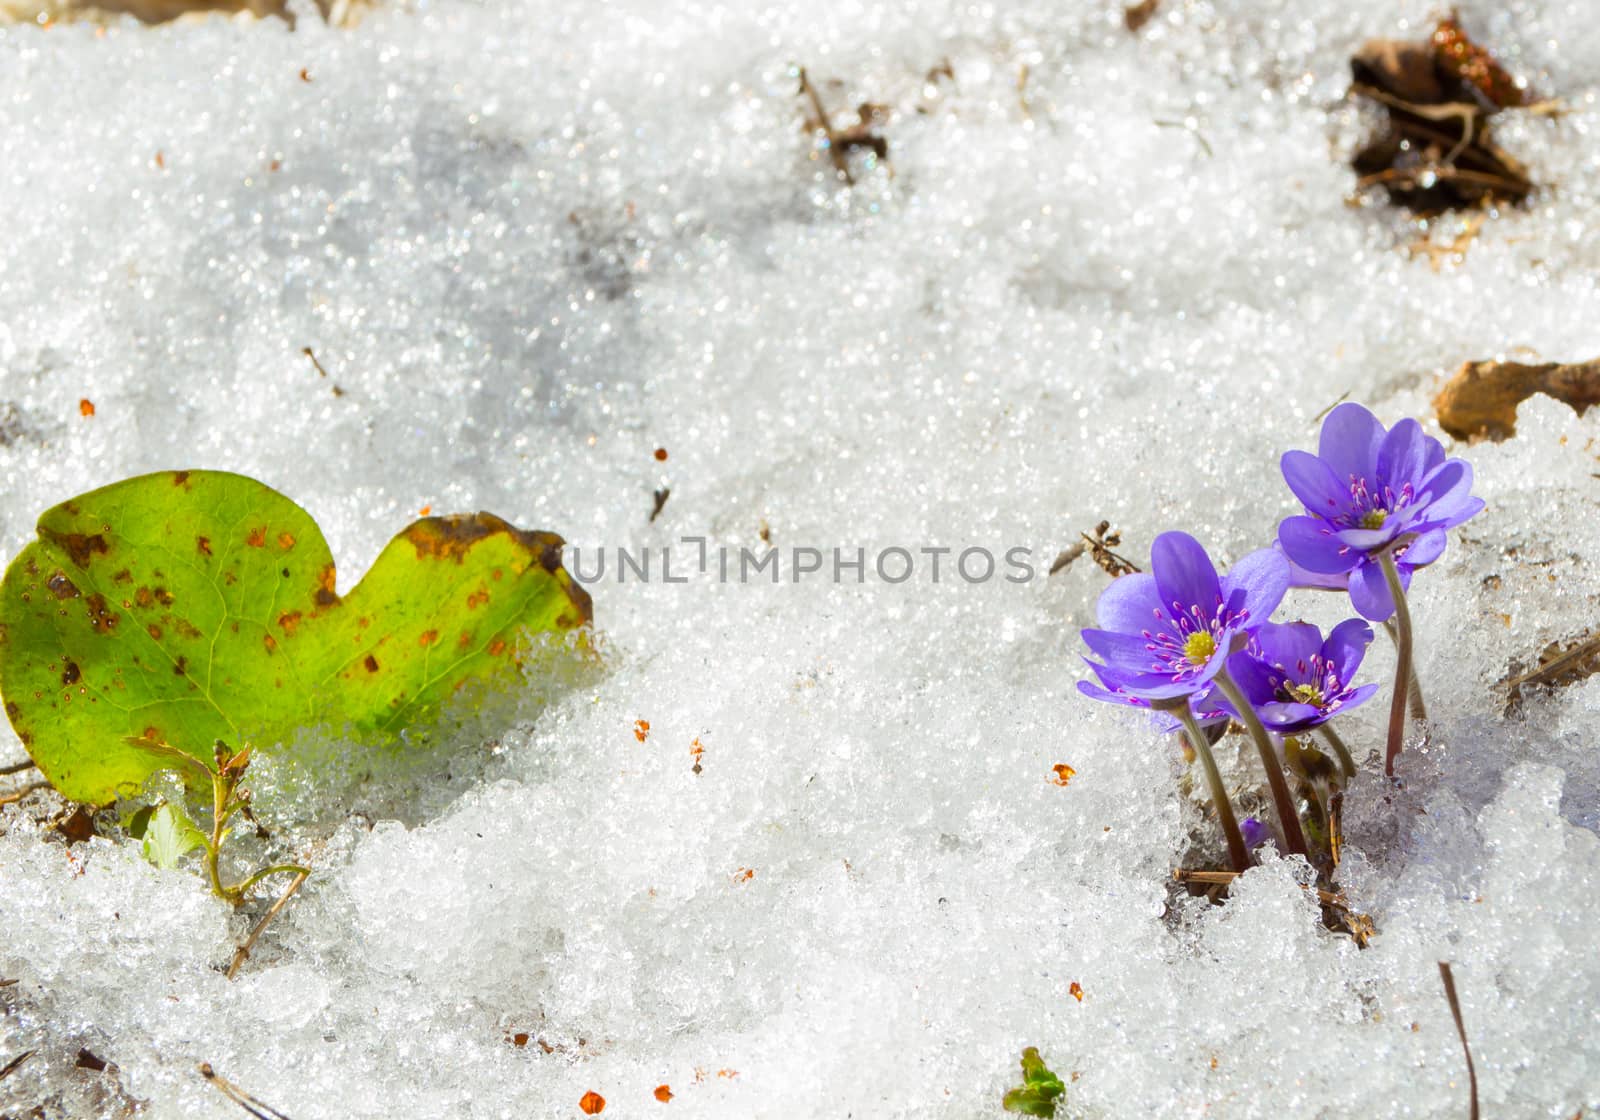 The first spring flowers in the melting snow